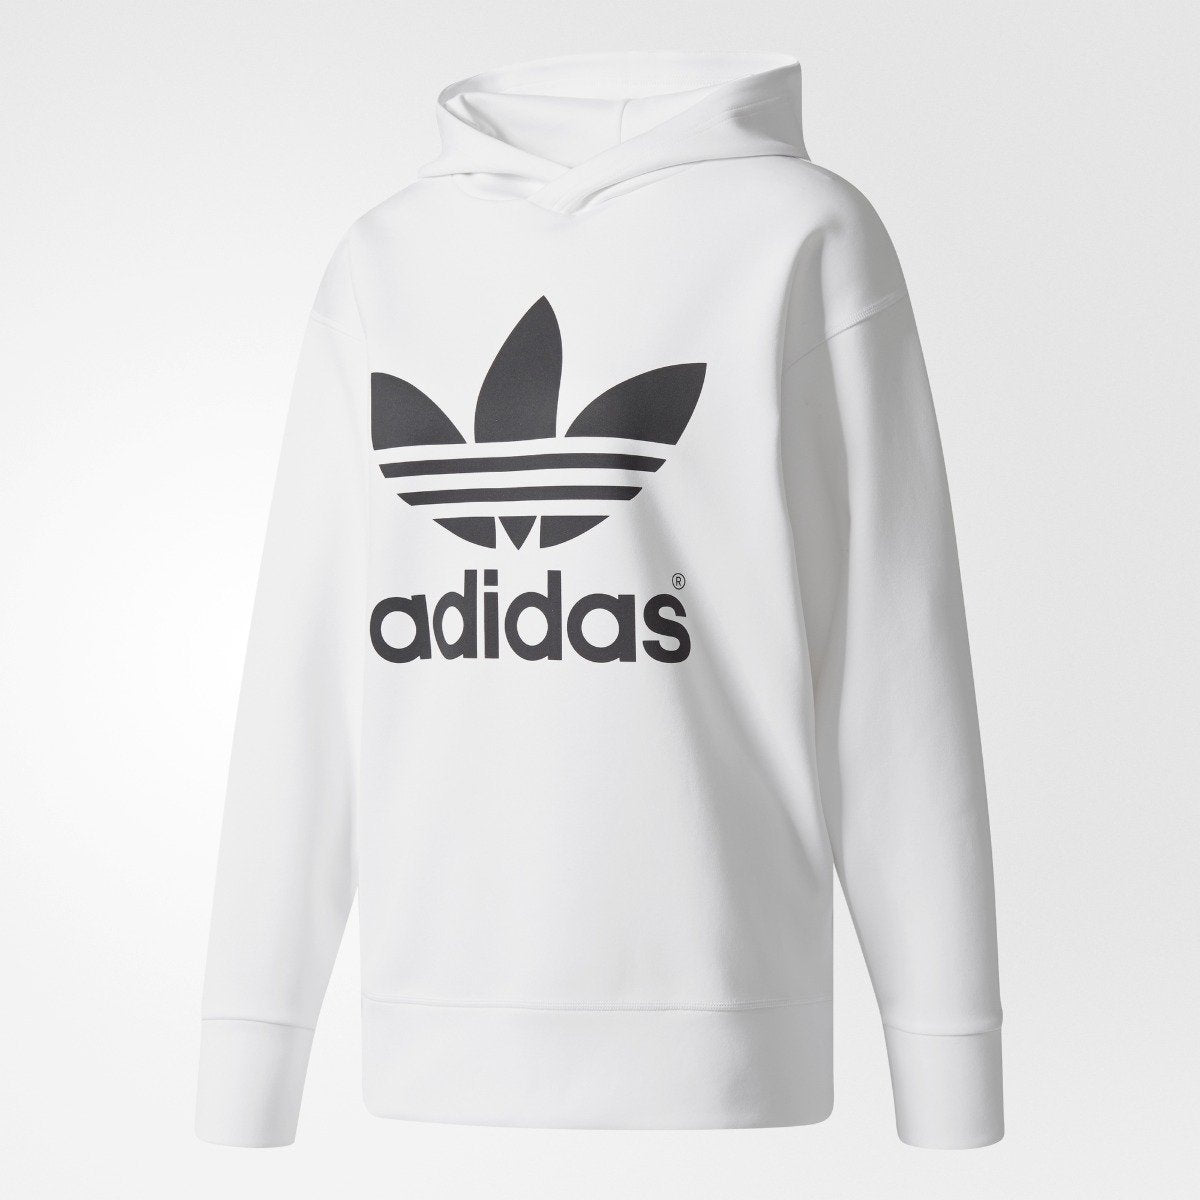 white and pink adidas hoodie